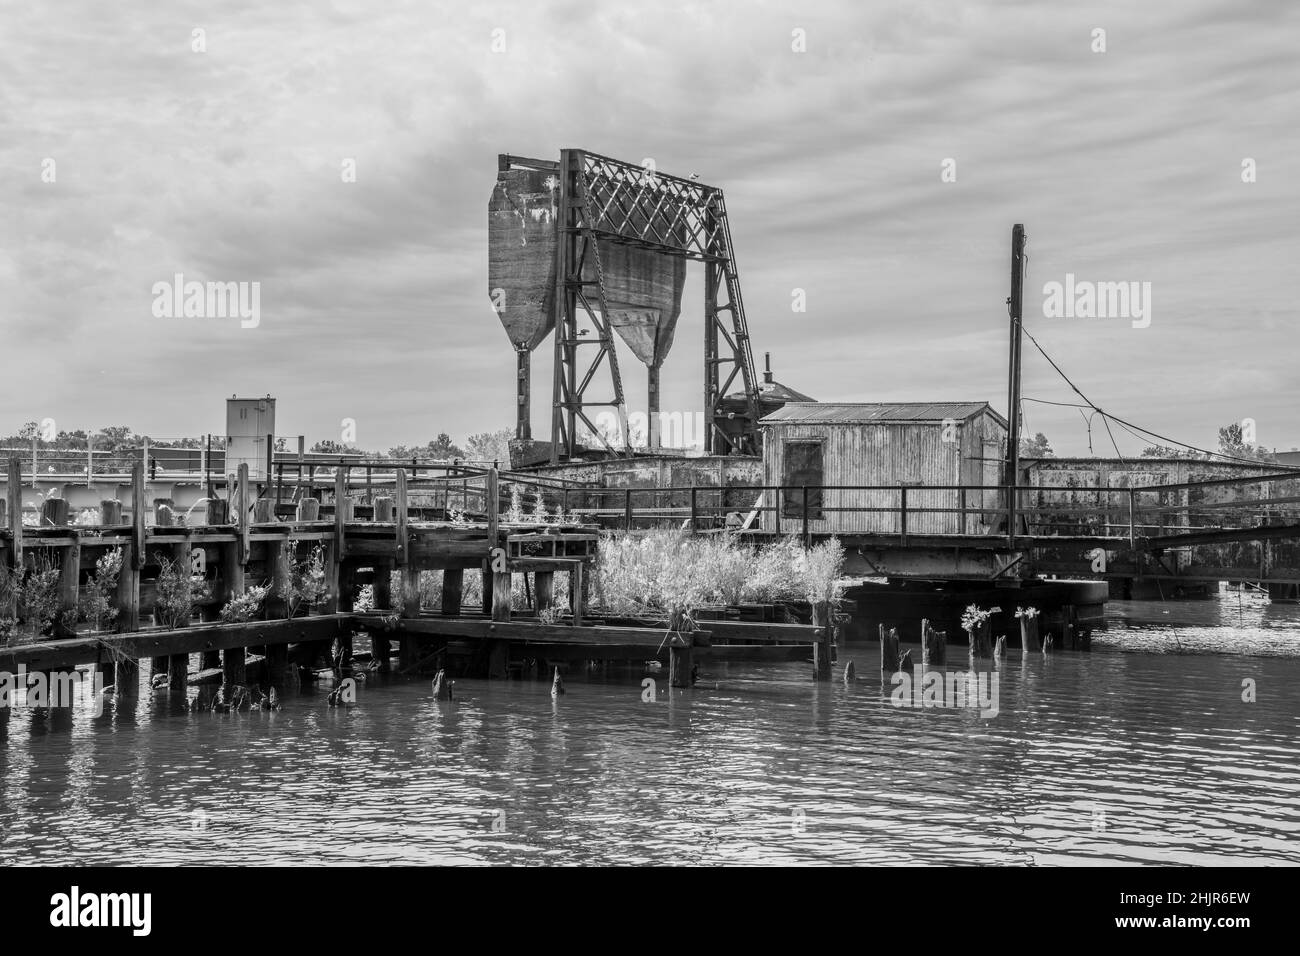 An old bascule railroad bridge (also referred to as a drawbridge or a lifting bridge) on a gray day with a counterweight. In black and white. Stock Photo